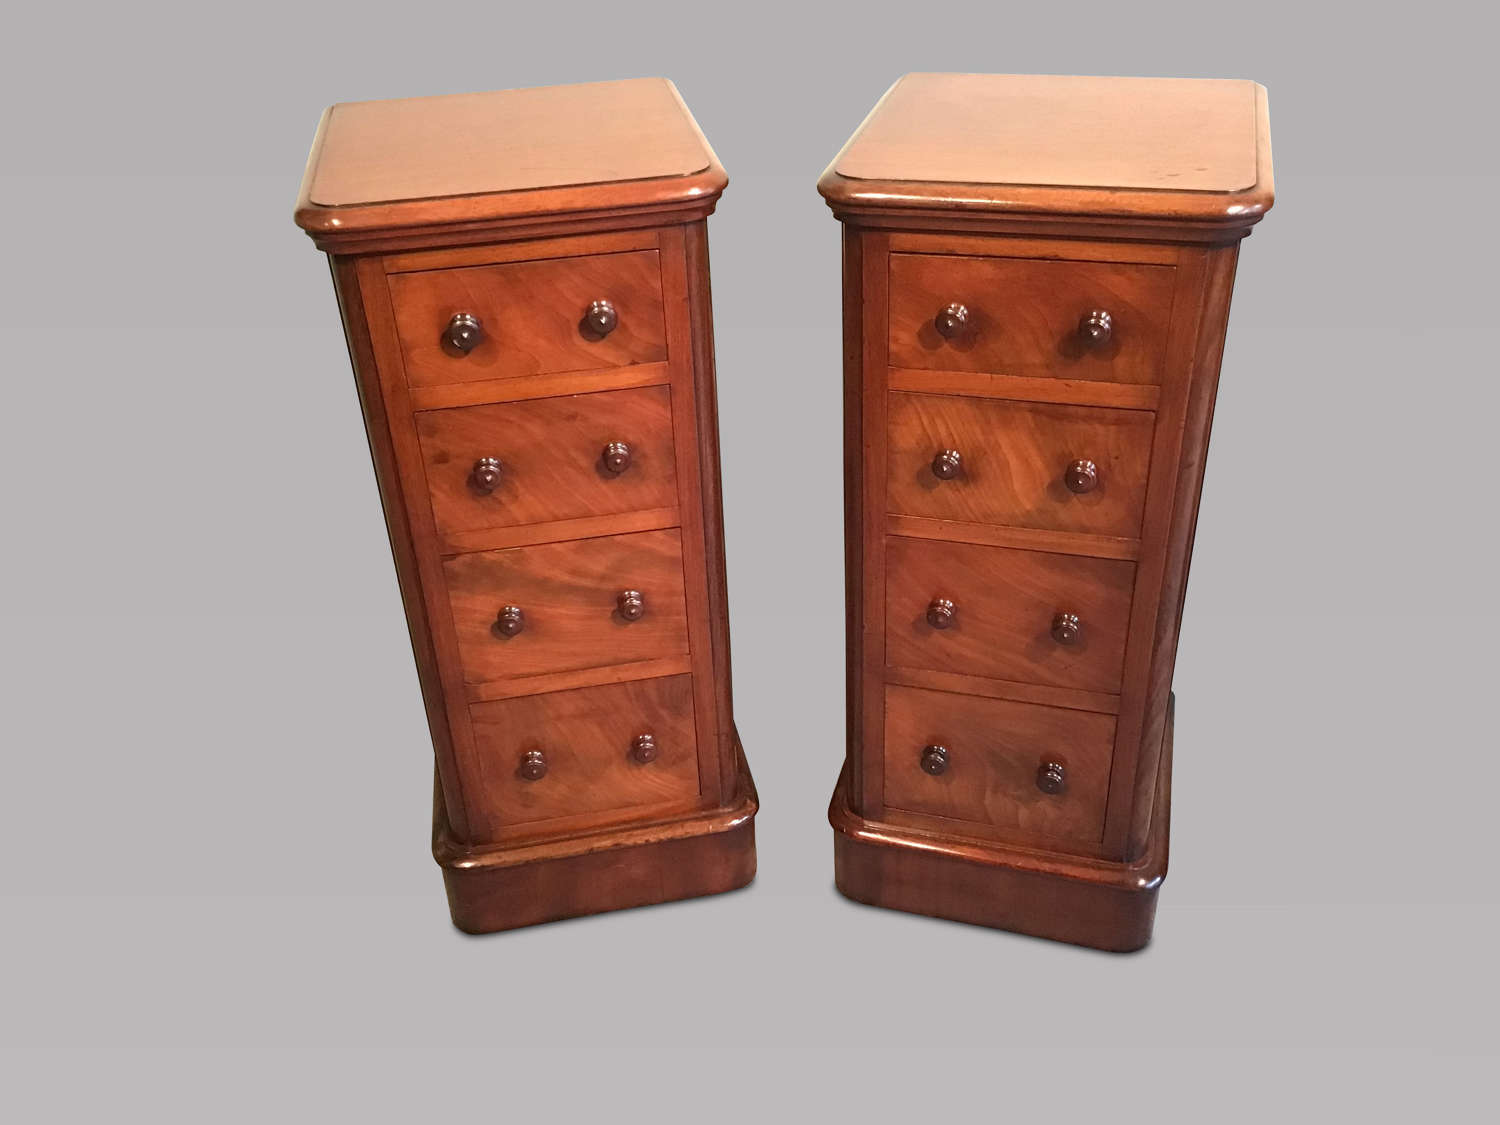 Pair of antique bedside chests